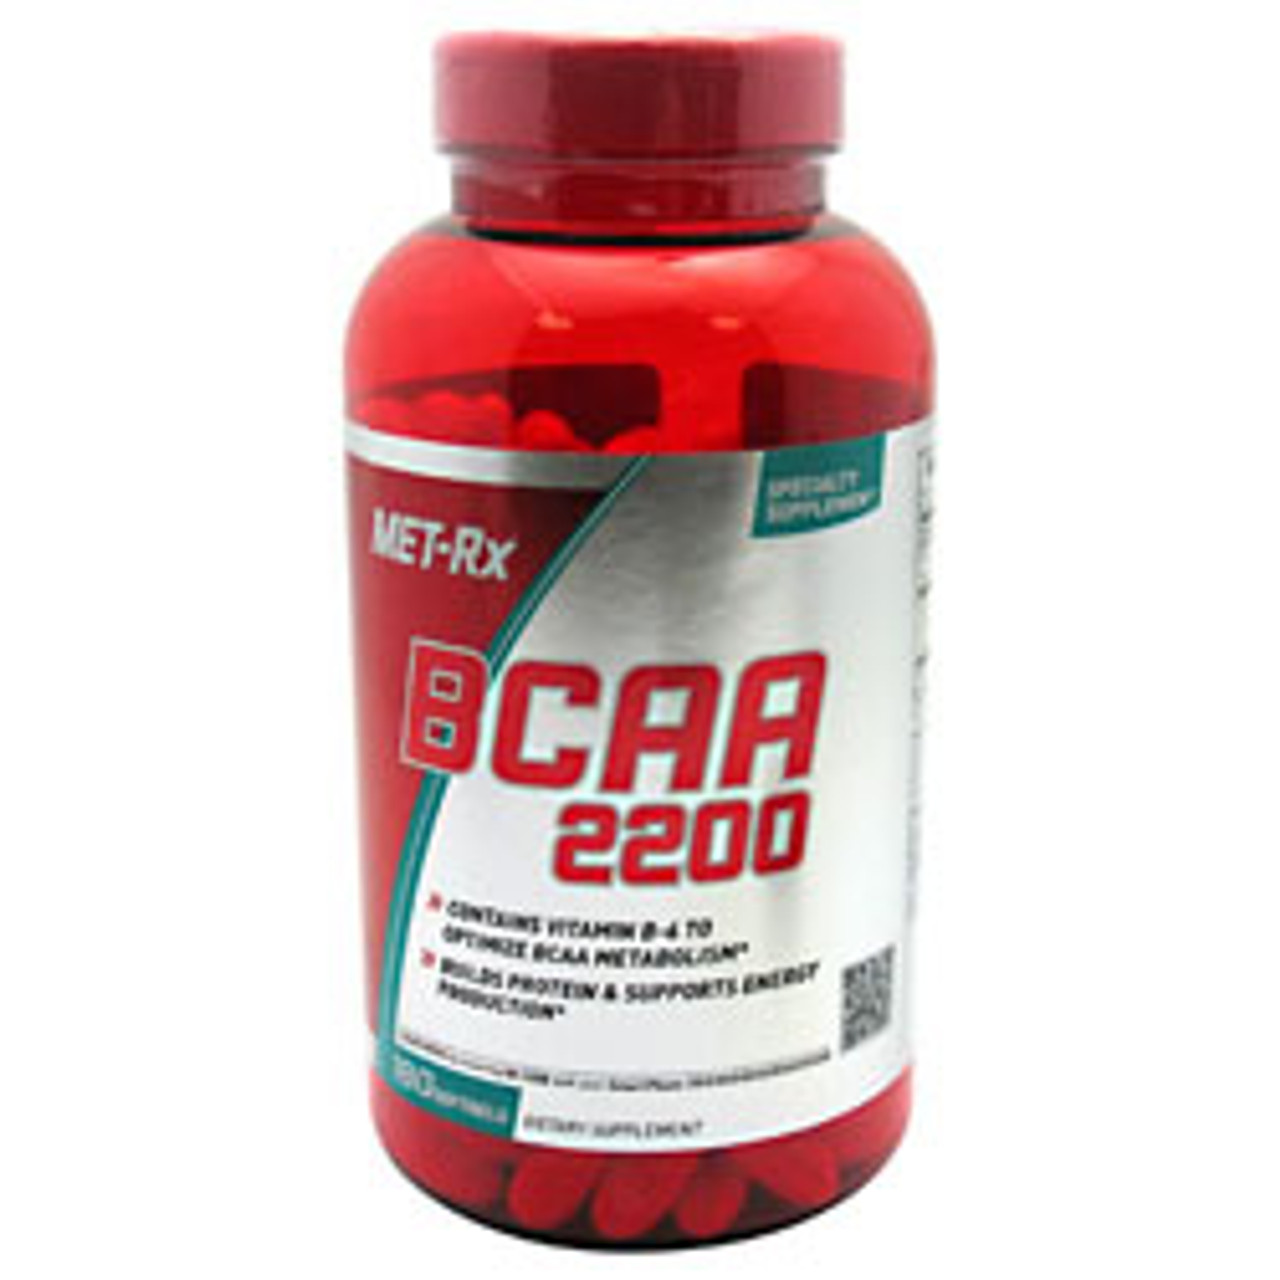 BCAA 2200 by Met-Rx 180ct